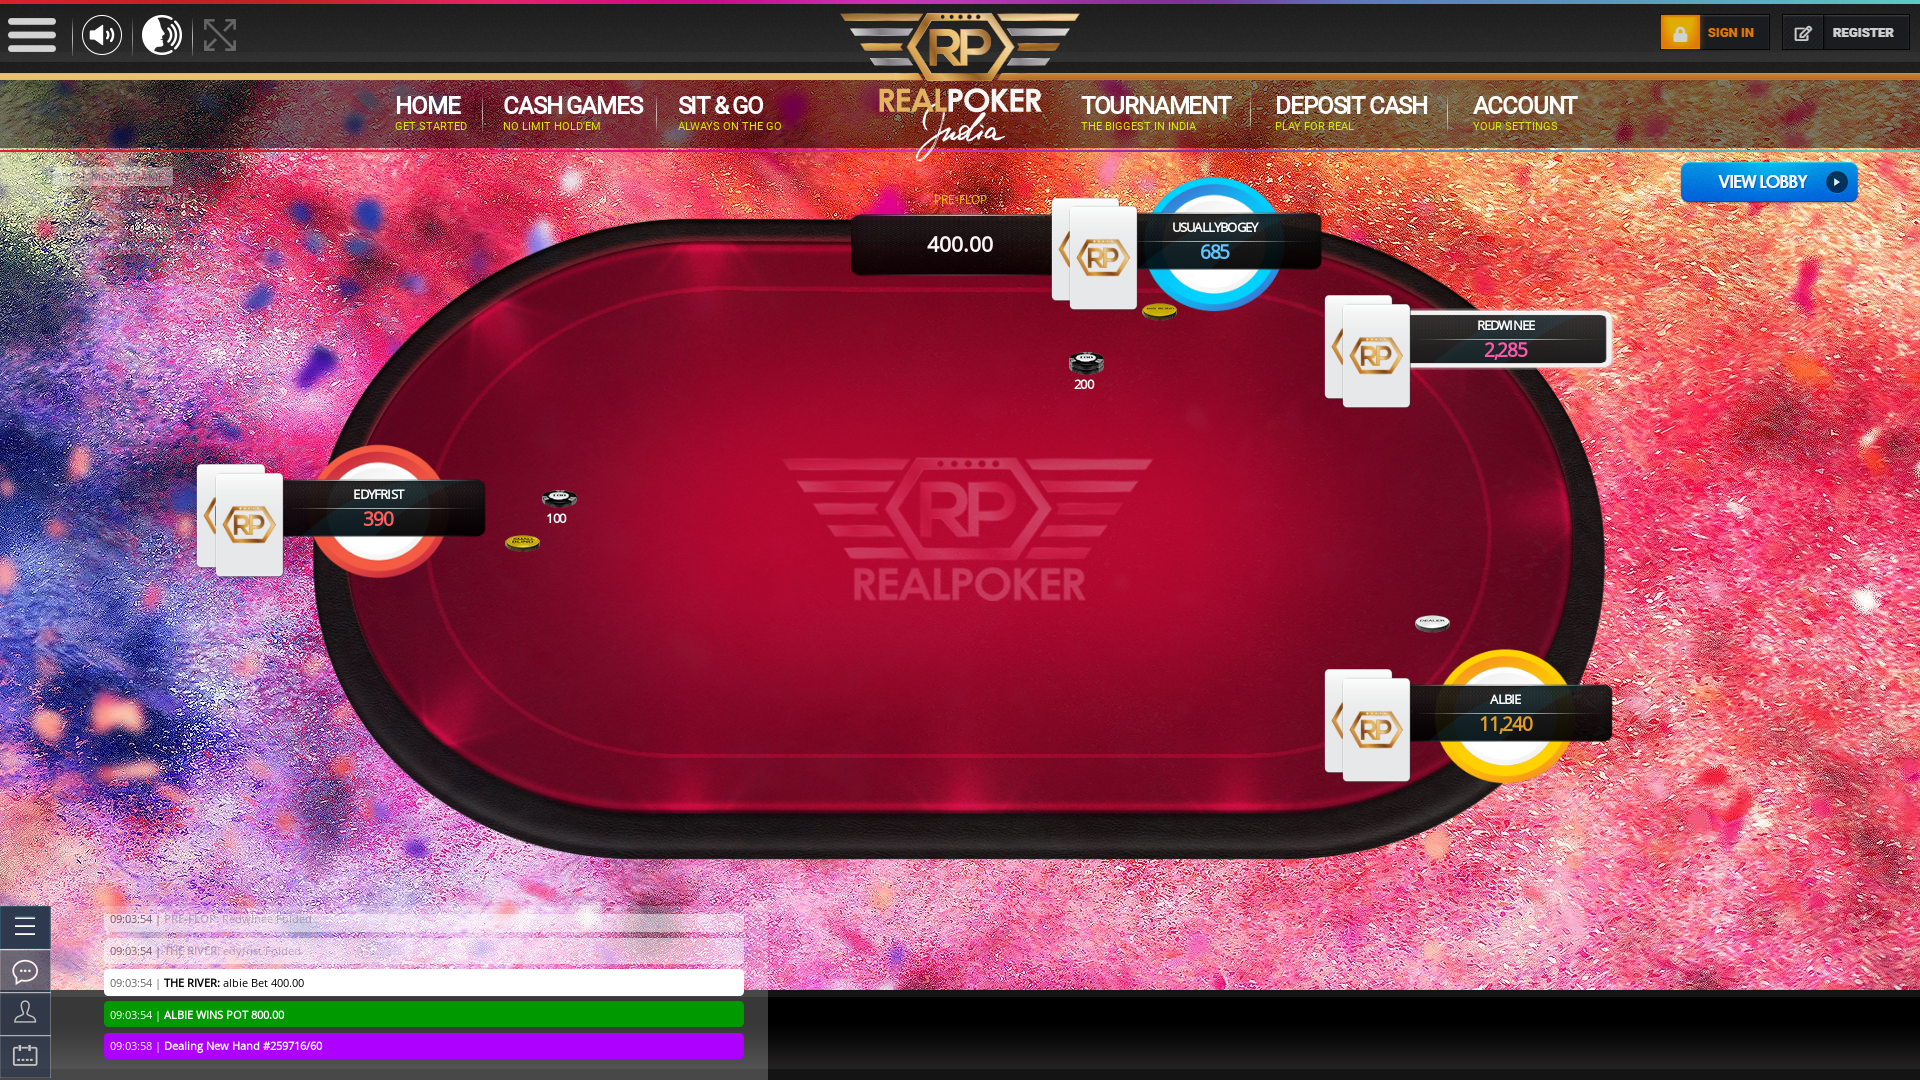 Indian online poker on a 10 player table in the 46th minute match up